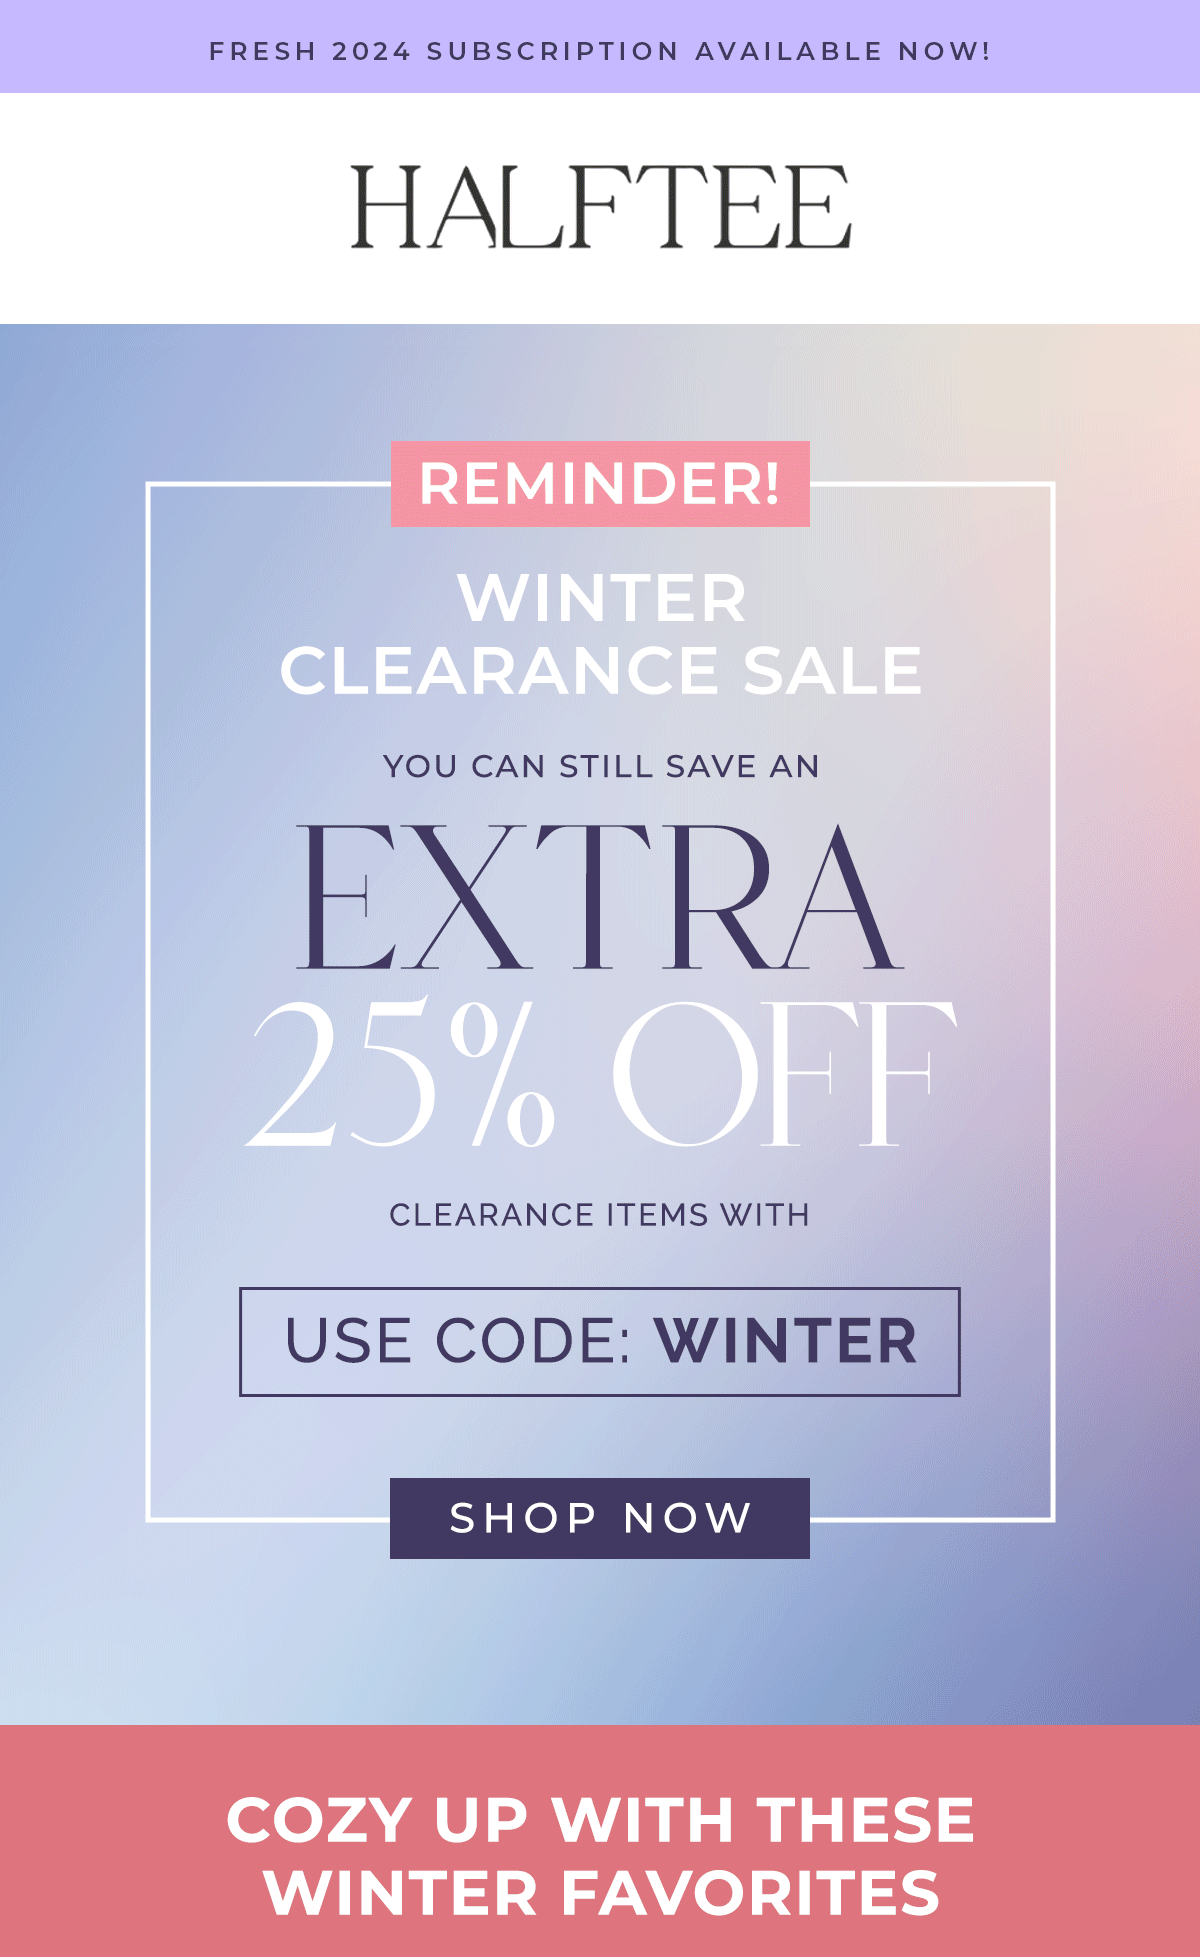 REMINDER! WINTER CLEARANCE SALE You can still save an extra 25% off clearance items with code WINTER